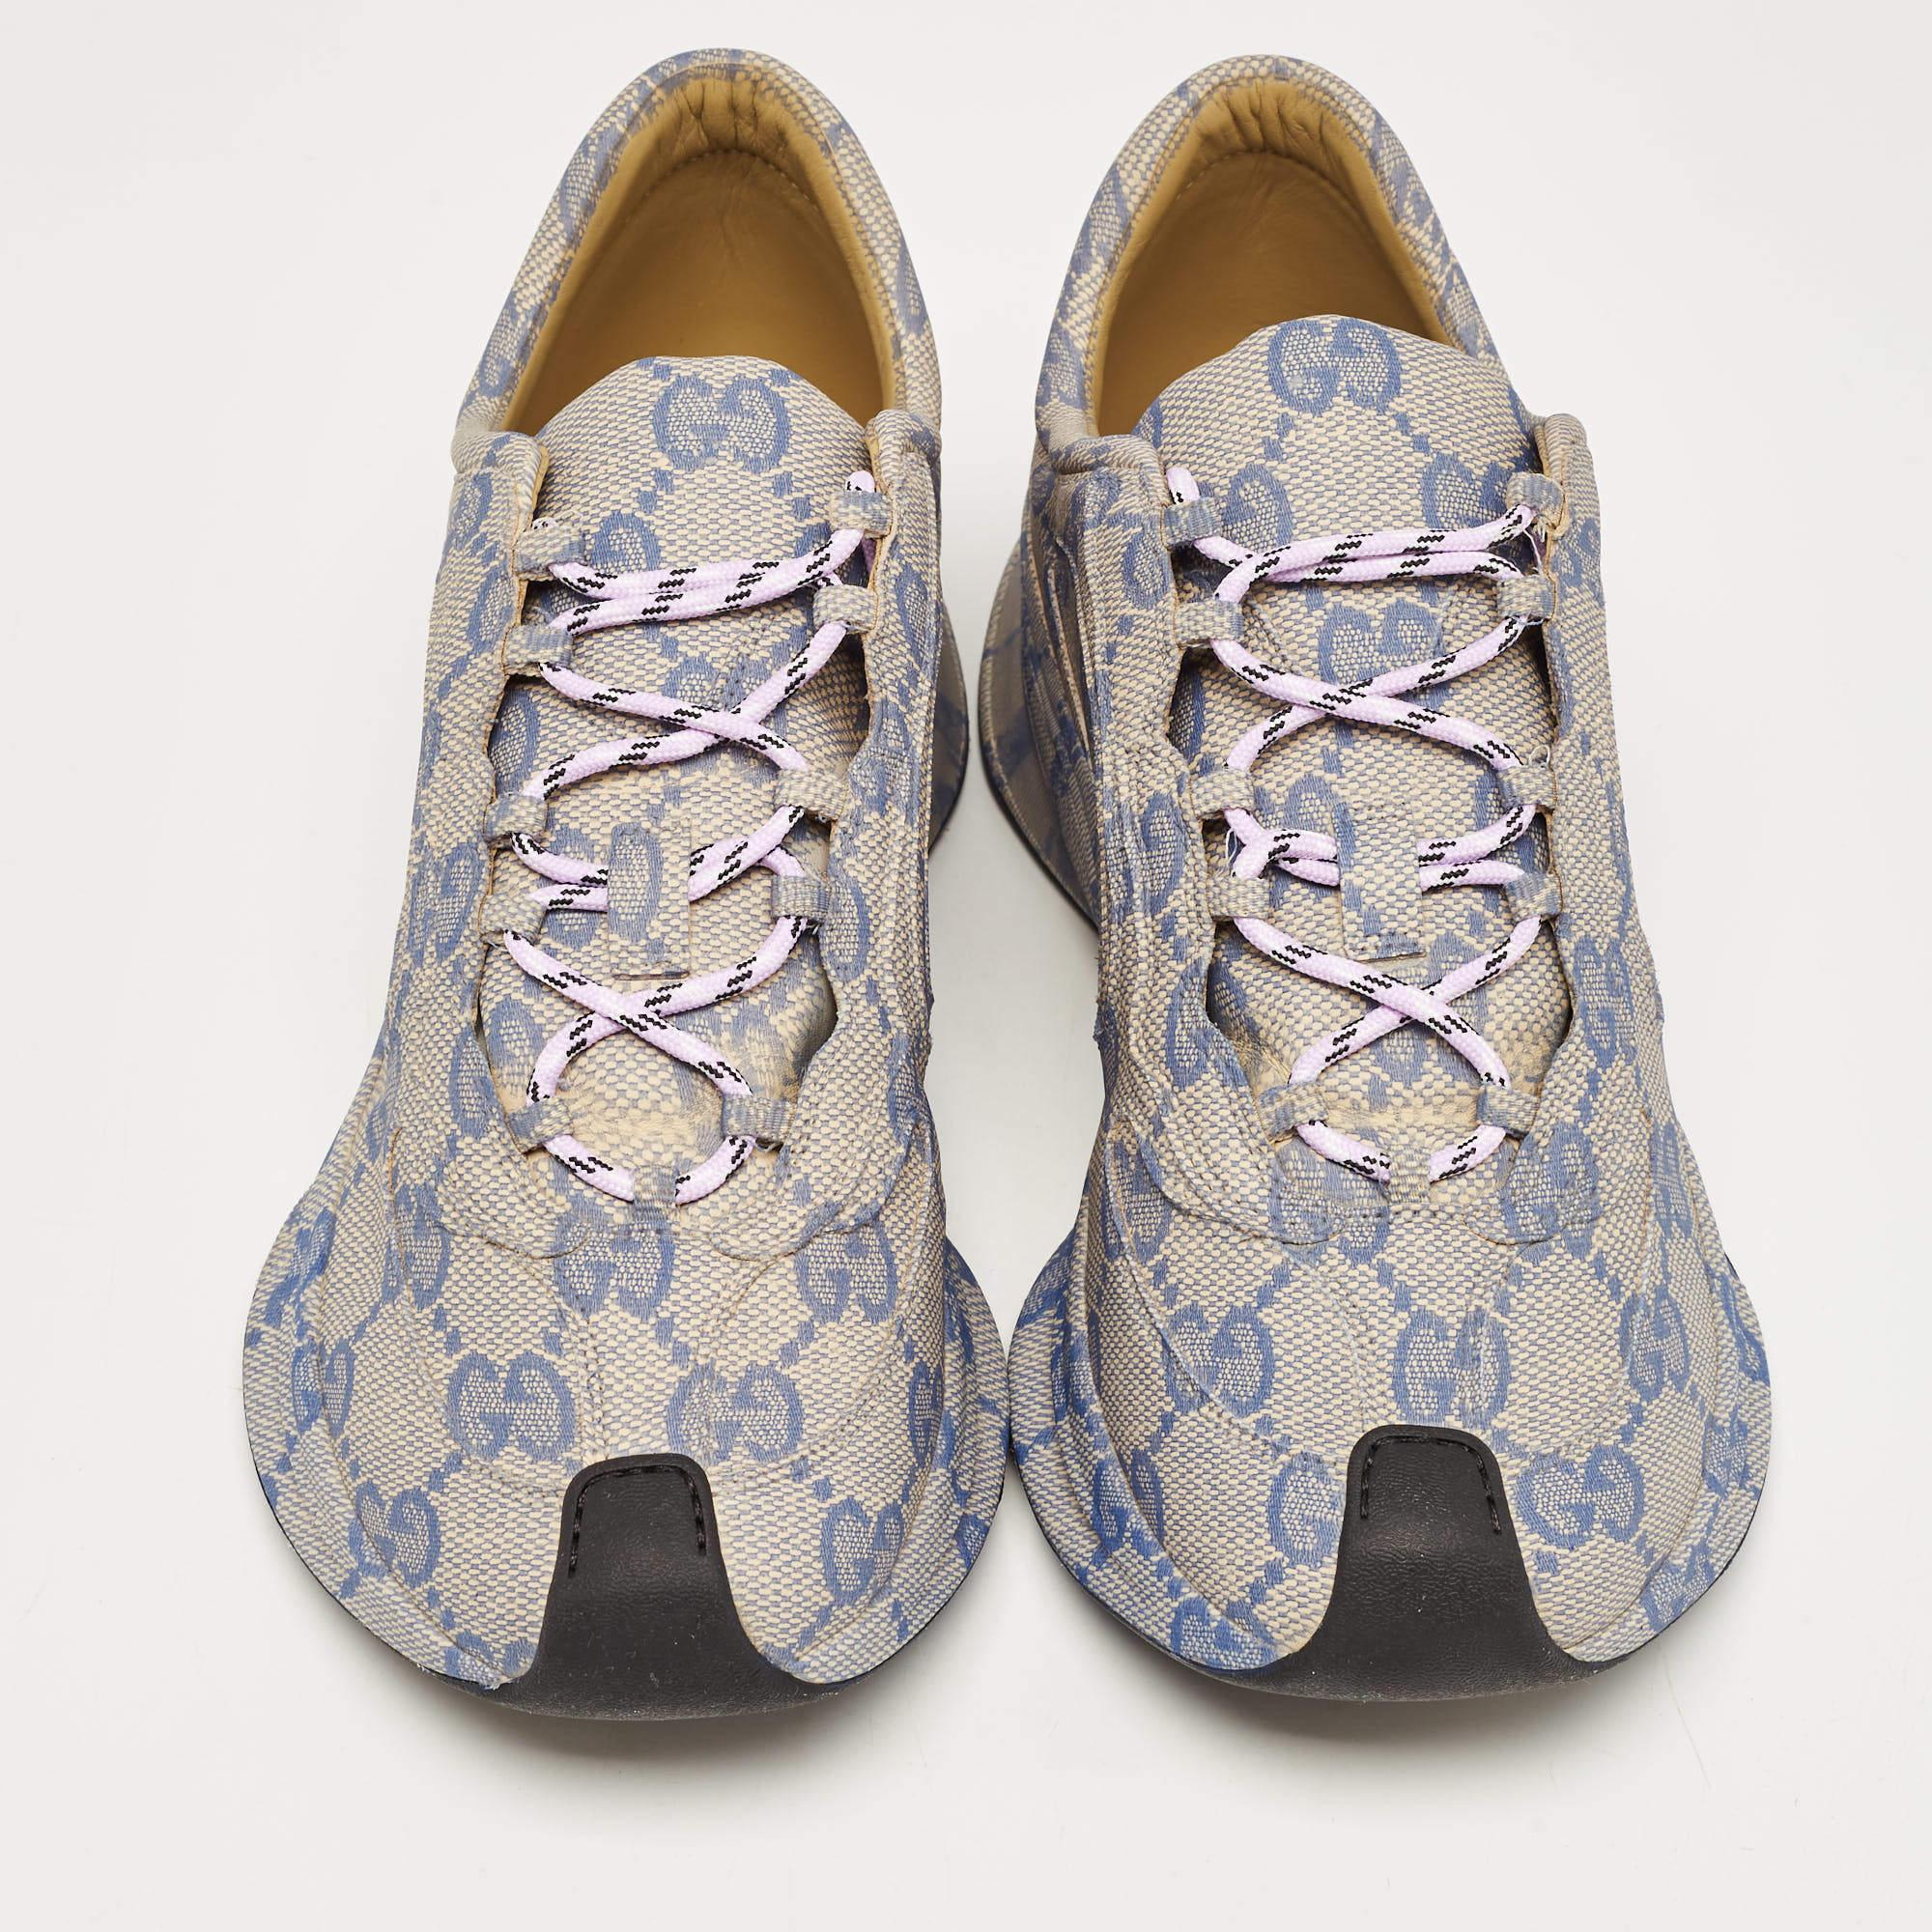 Covered in the signature GG, there's no mistaking this pair for anything other than Gucci. Luxe in appearance, the sneakers come in printed leather, secured with lace-ups, and supported by durable soles.

Includes: Original Dustbag, Original Box,